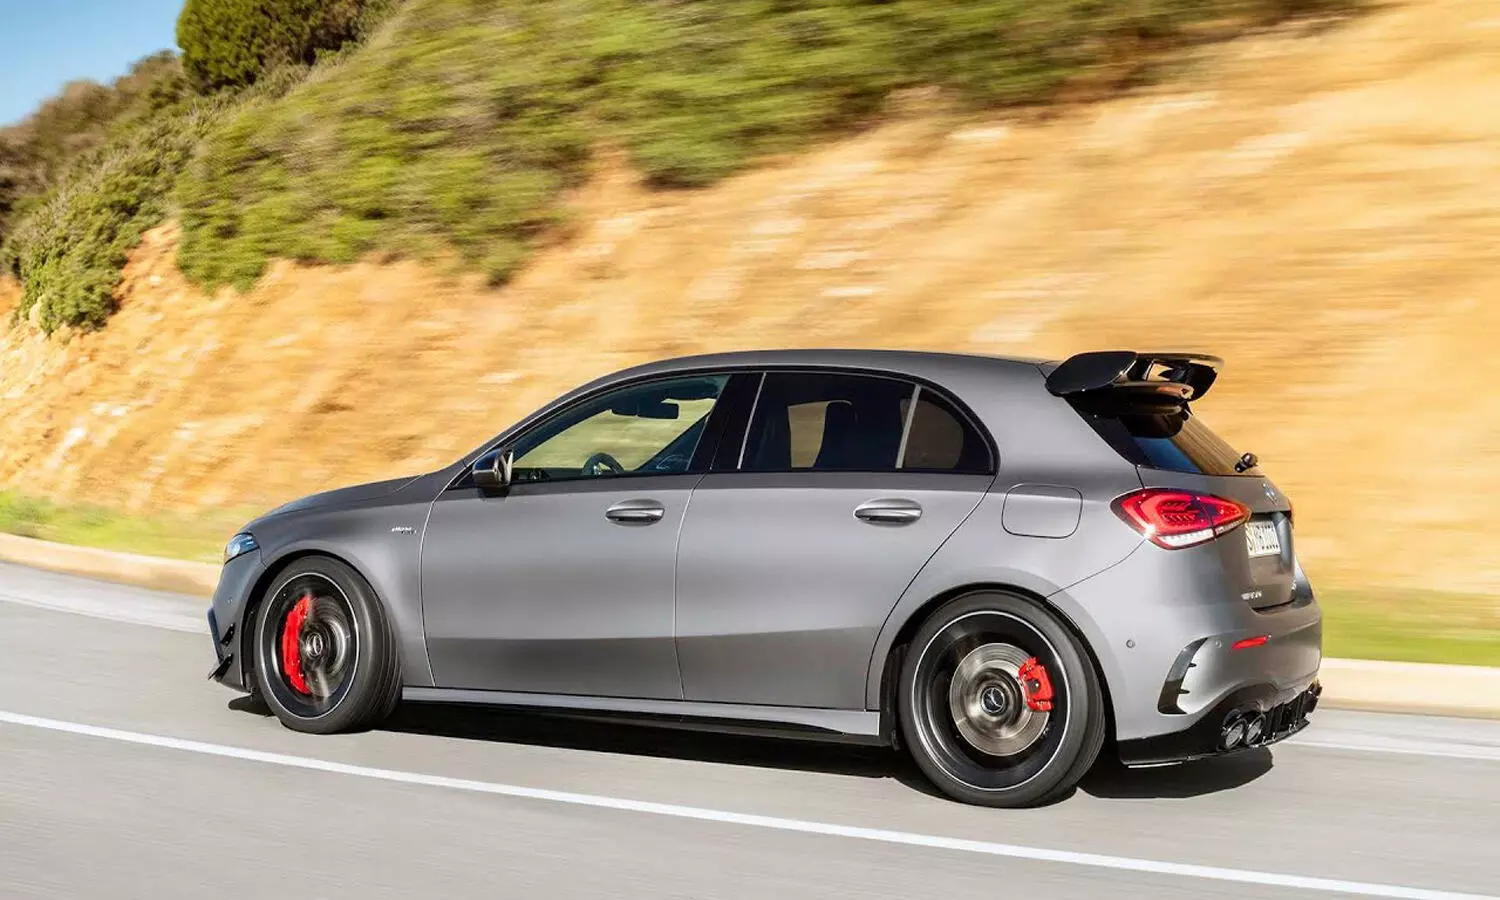 Check Out the Top 5 Hatchbacks of 2021